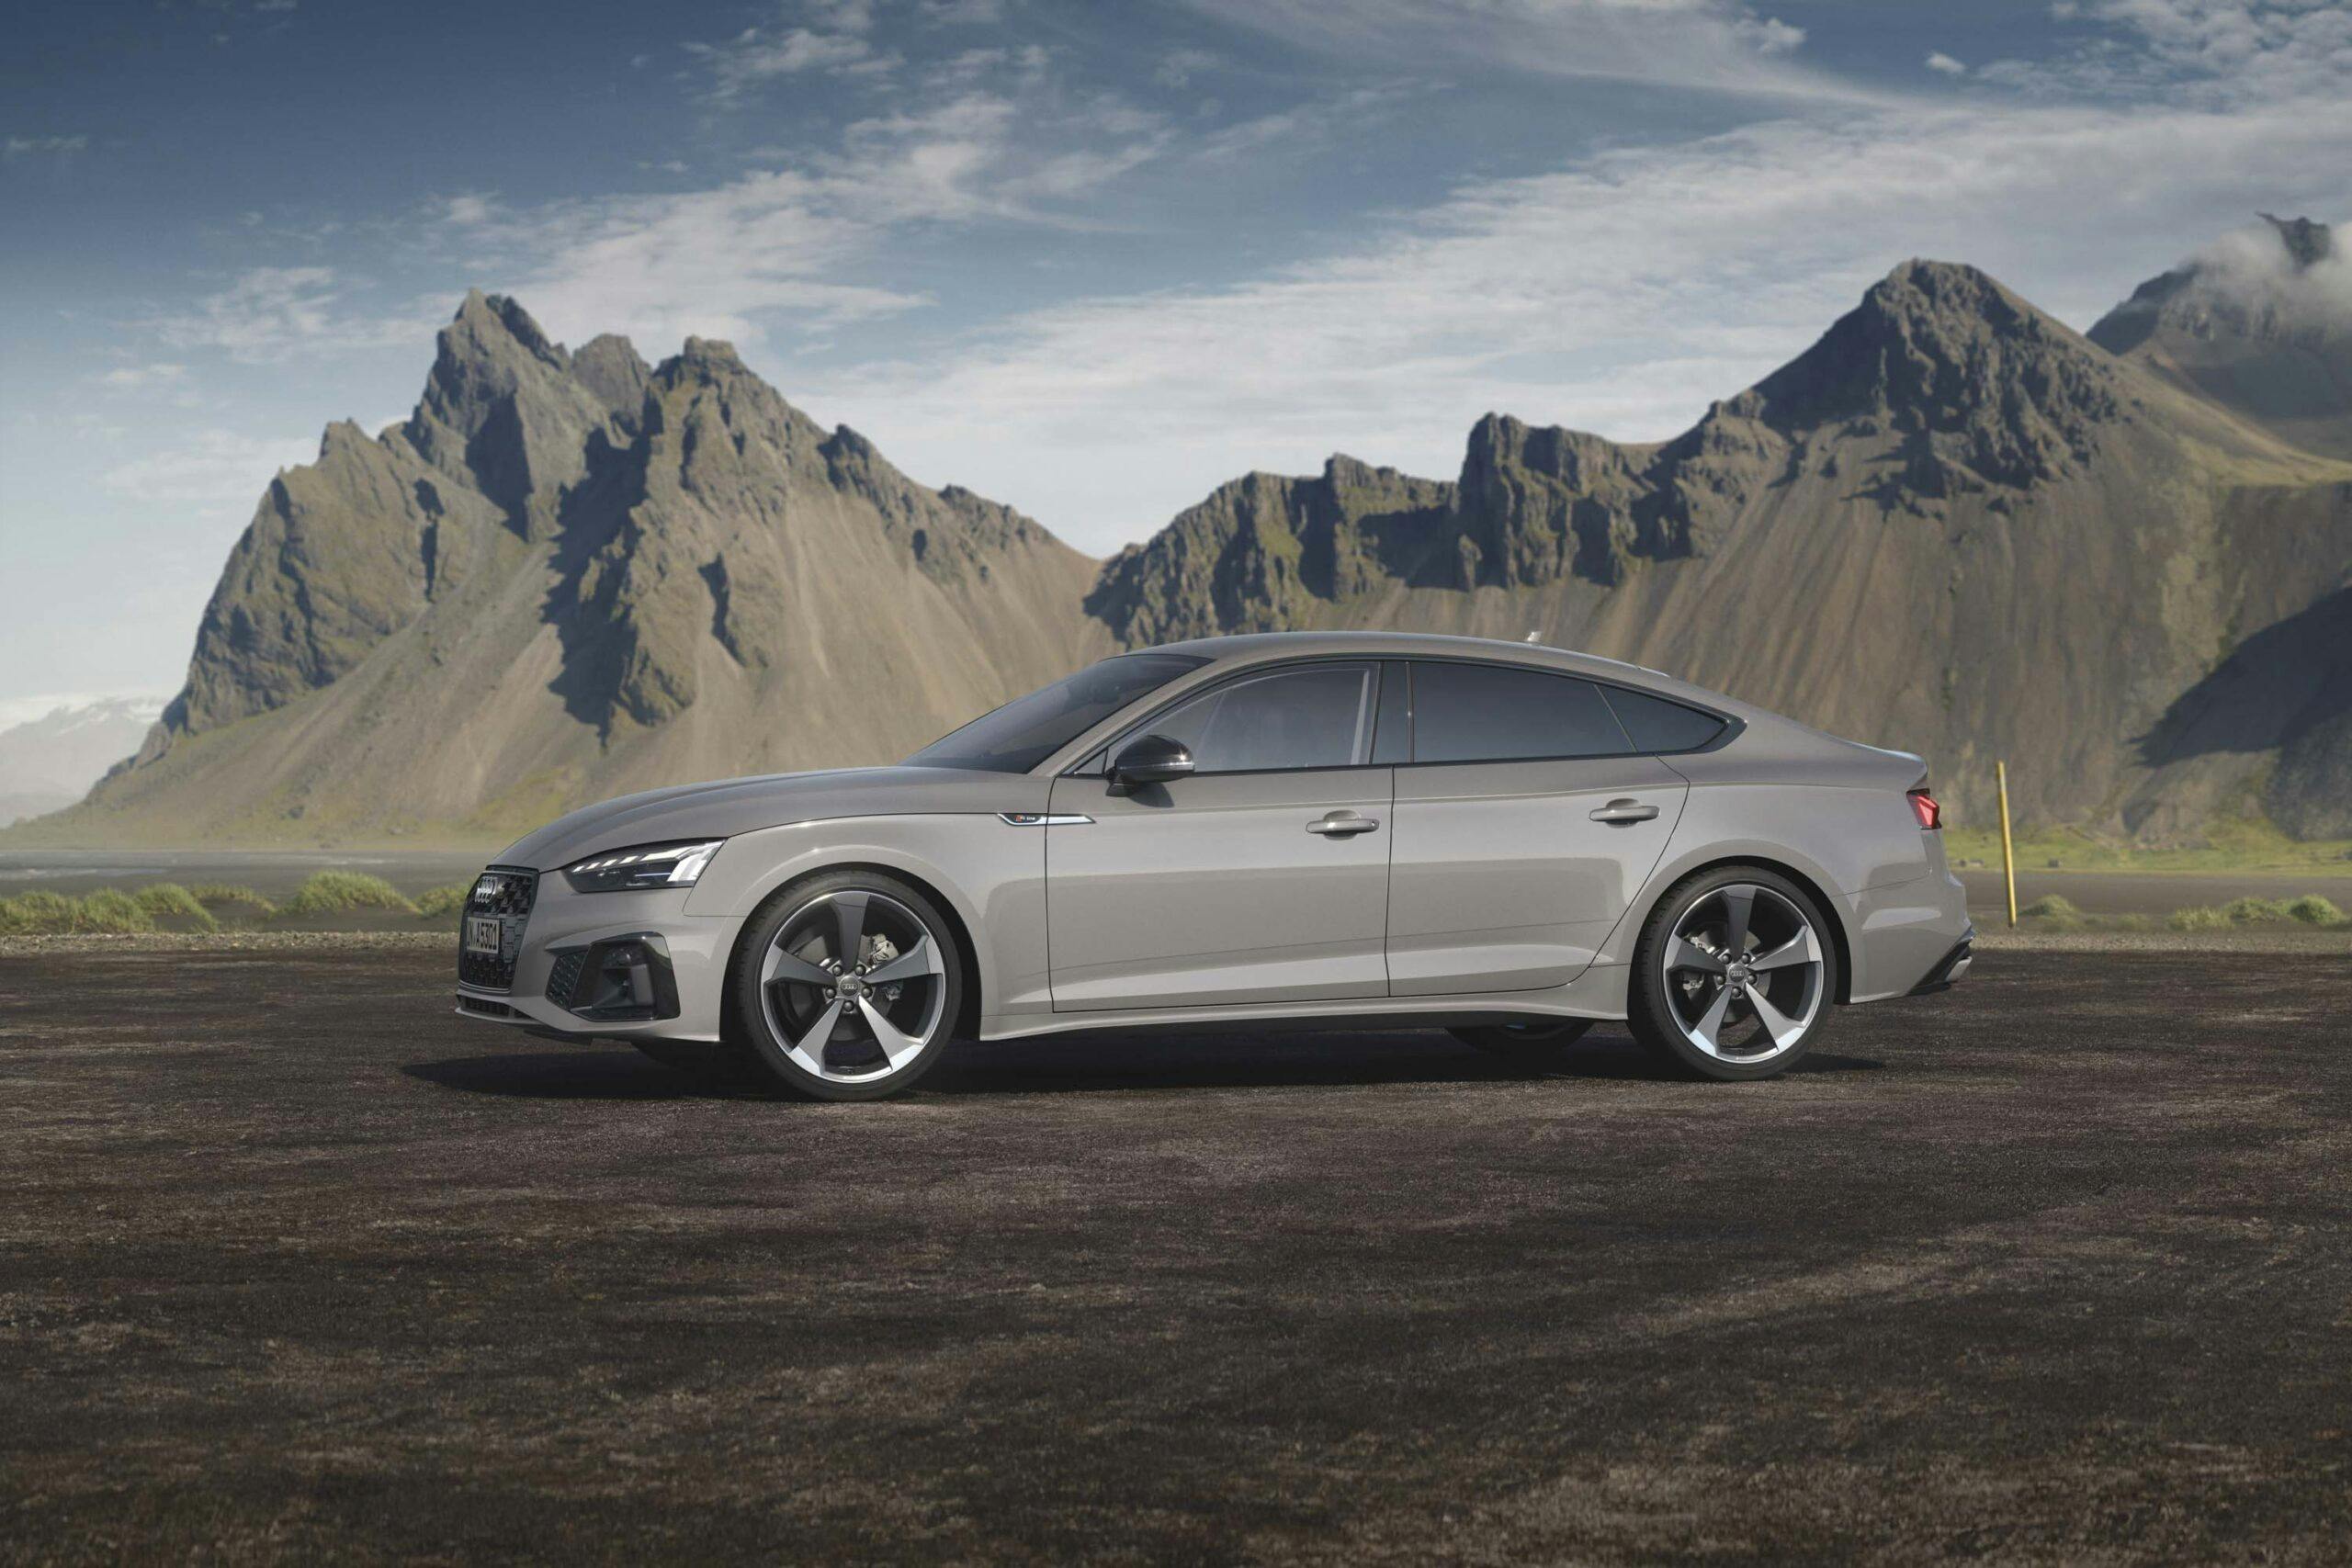 https://wsa-website-assets.s3.amazonaws.com/assets/images/audi-A5-scaled.jpg